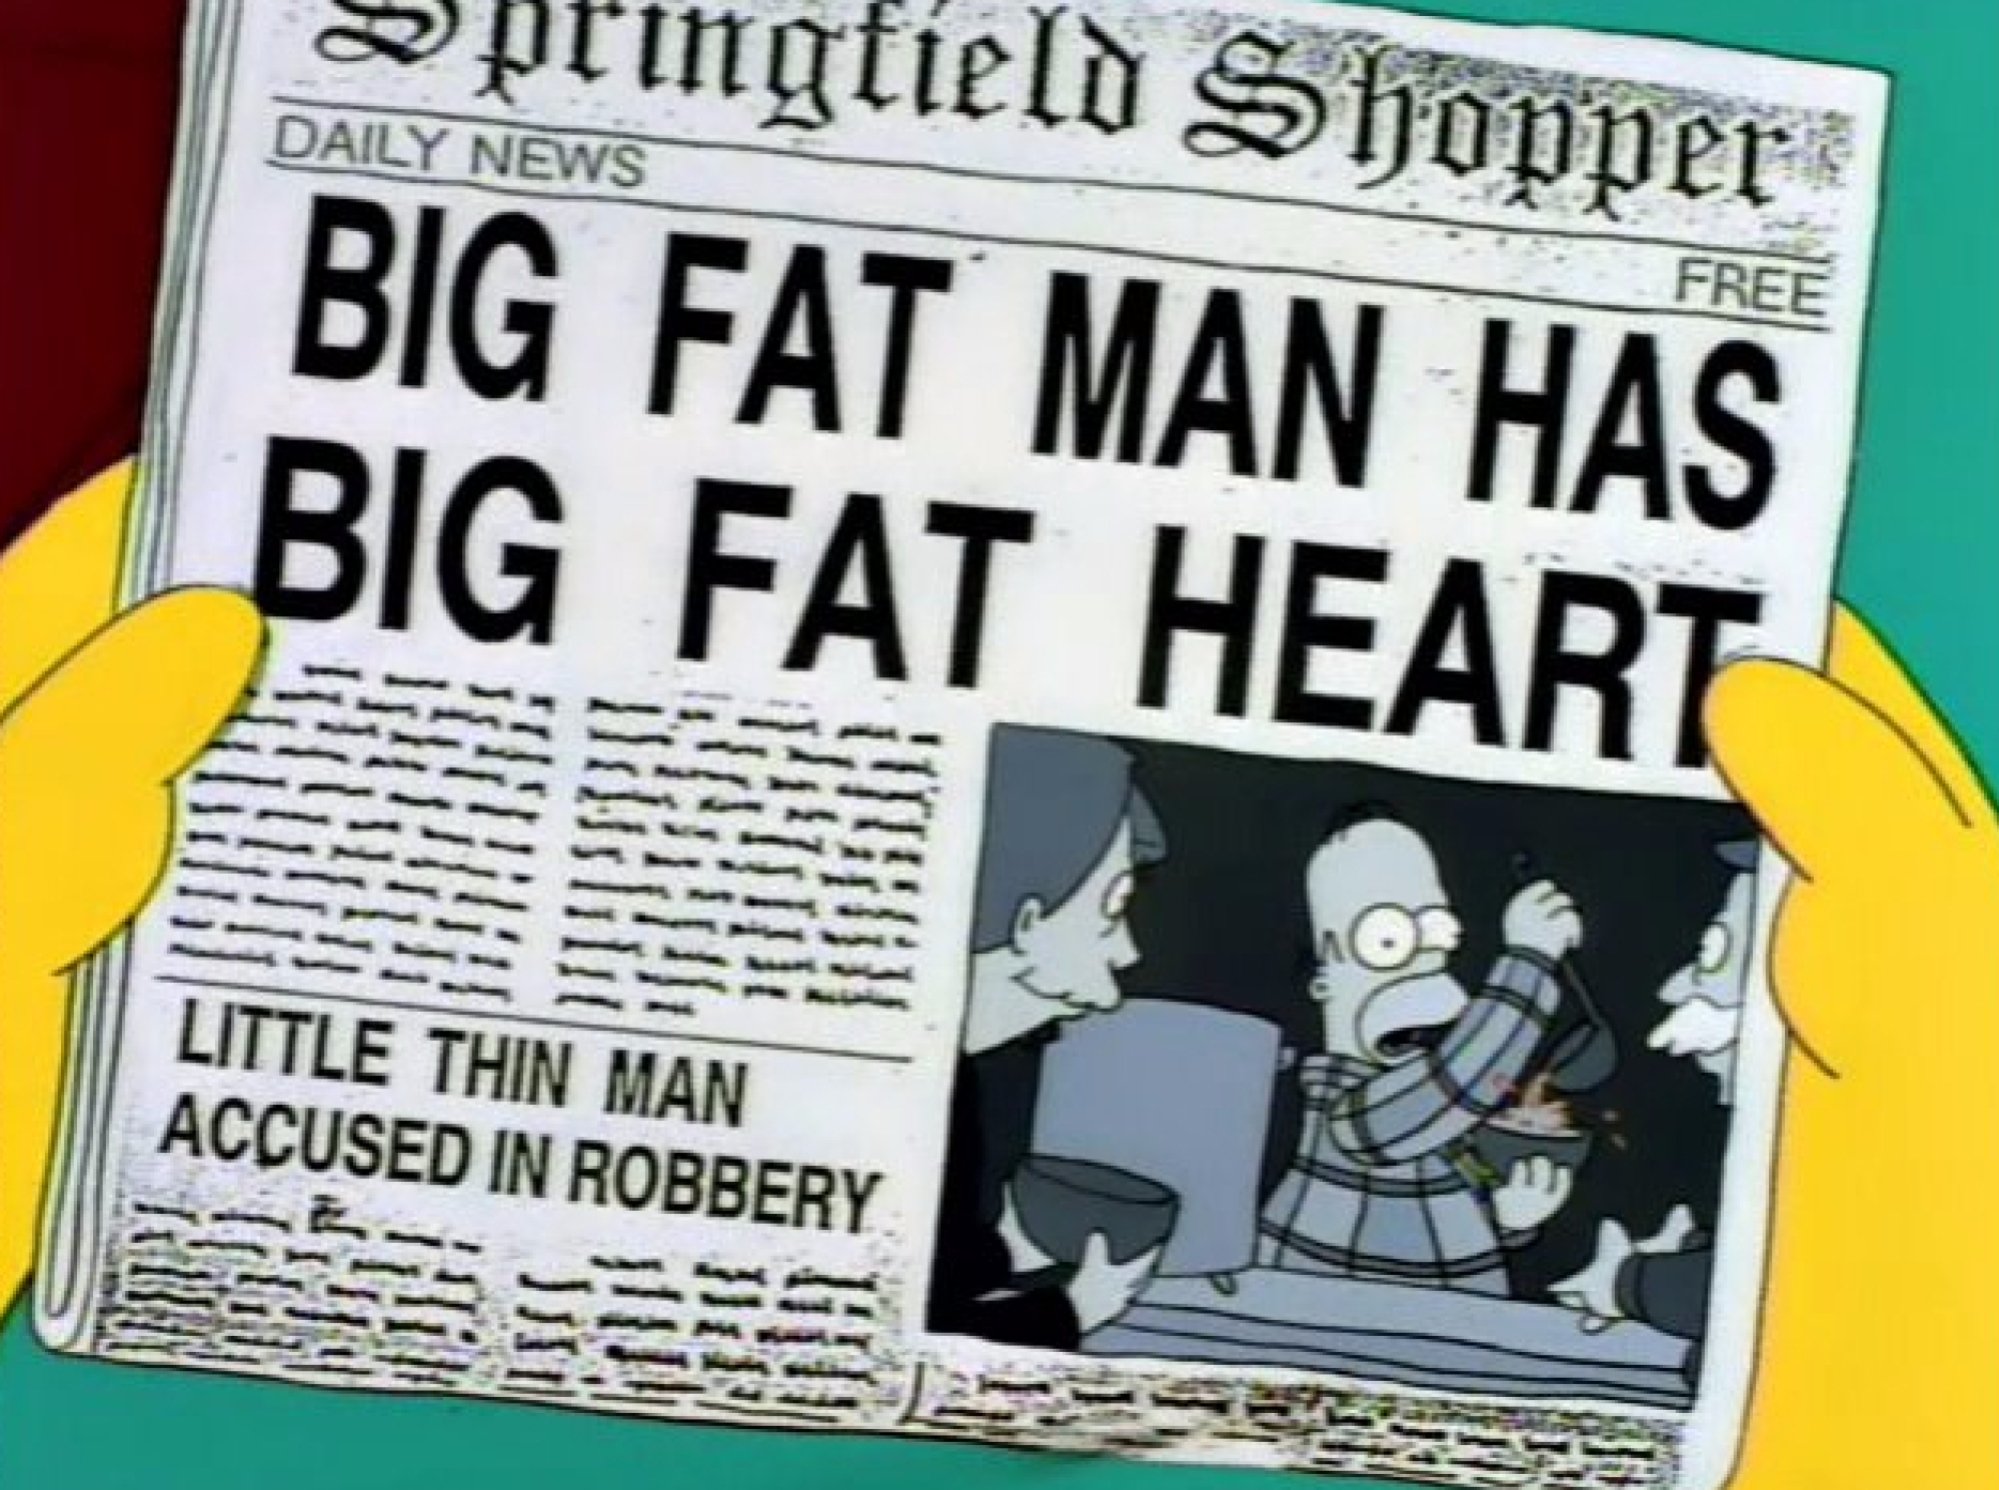 A screenshot from "The Simpsons" showing a newspaper. The headline reads: "Big Fat Man Has a Big Fat Heart."